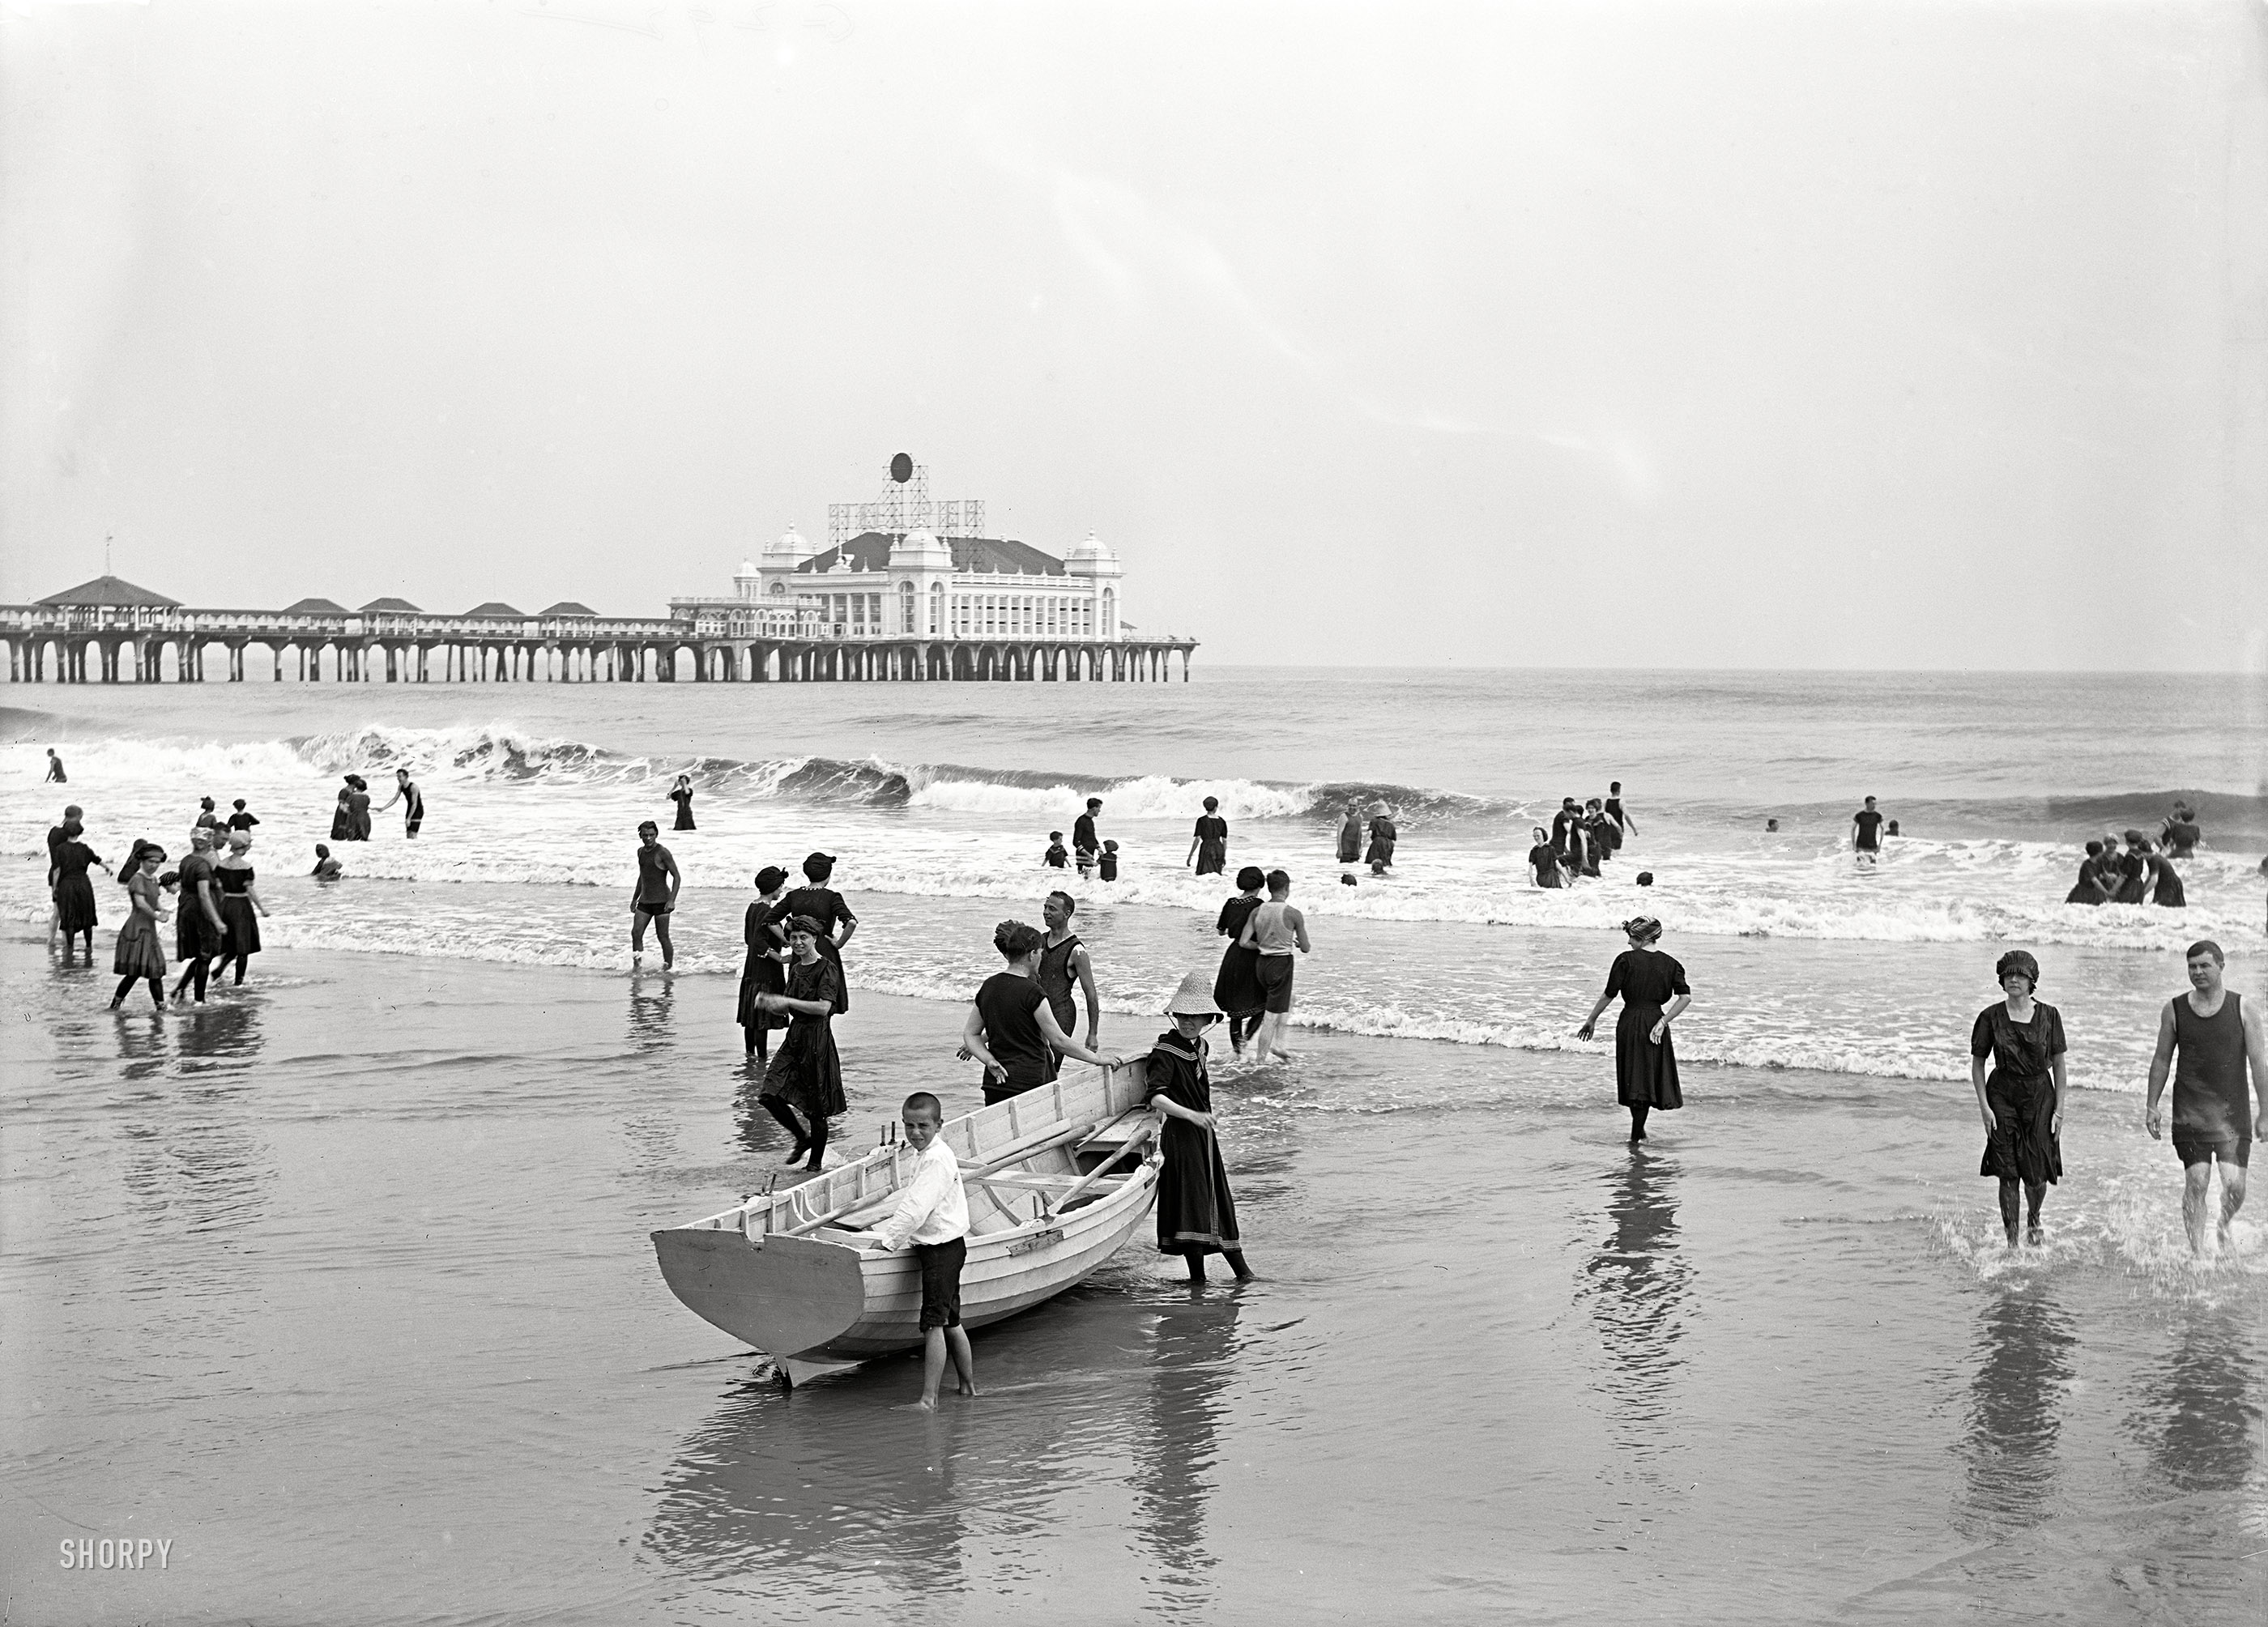 The Jersey Shore circa 1915. "Atlantic City bathers and Steel Pier." 5x7 inch dry plate glass negative, Detroit Publishing Company. View full size.